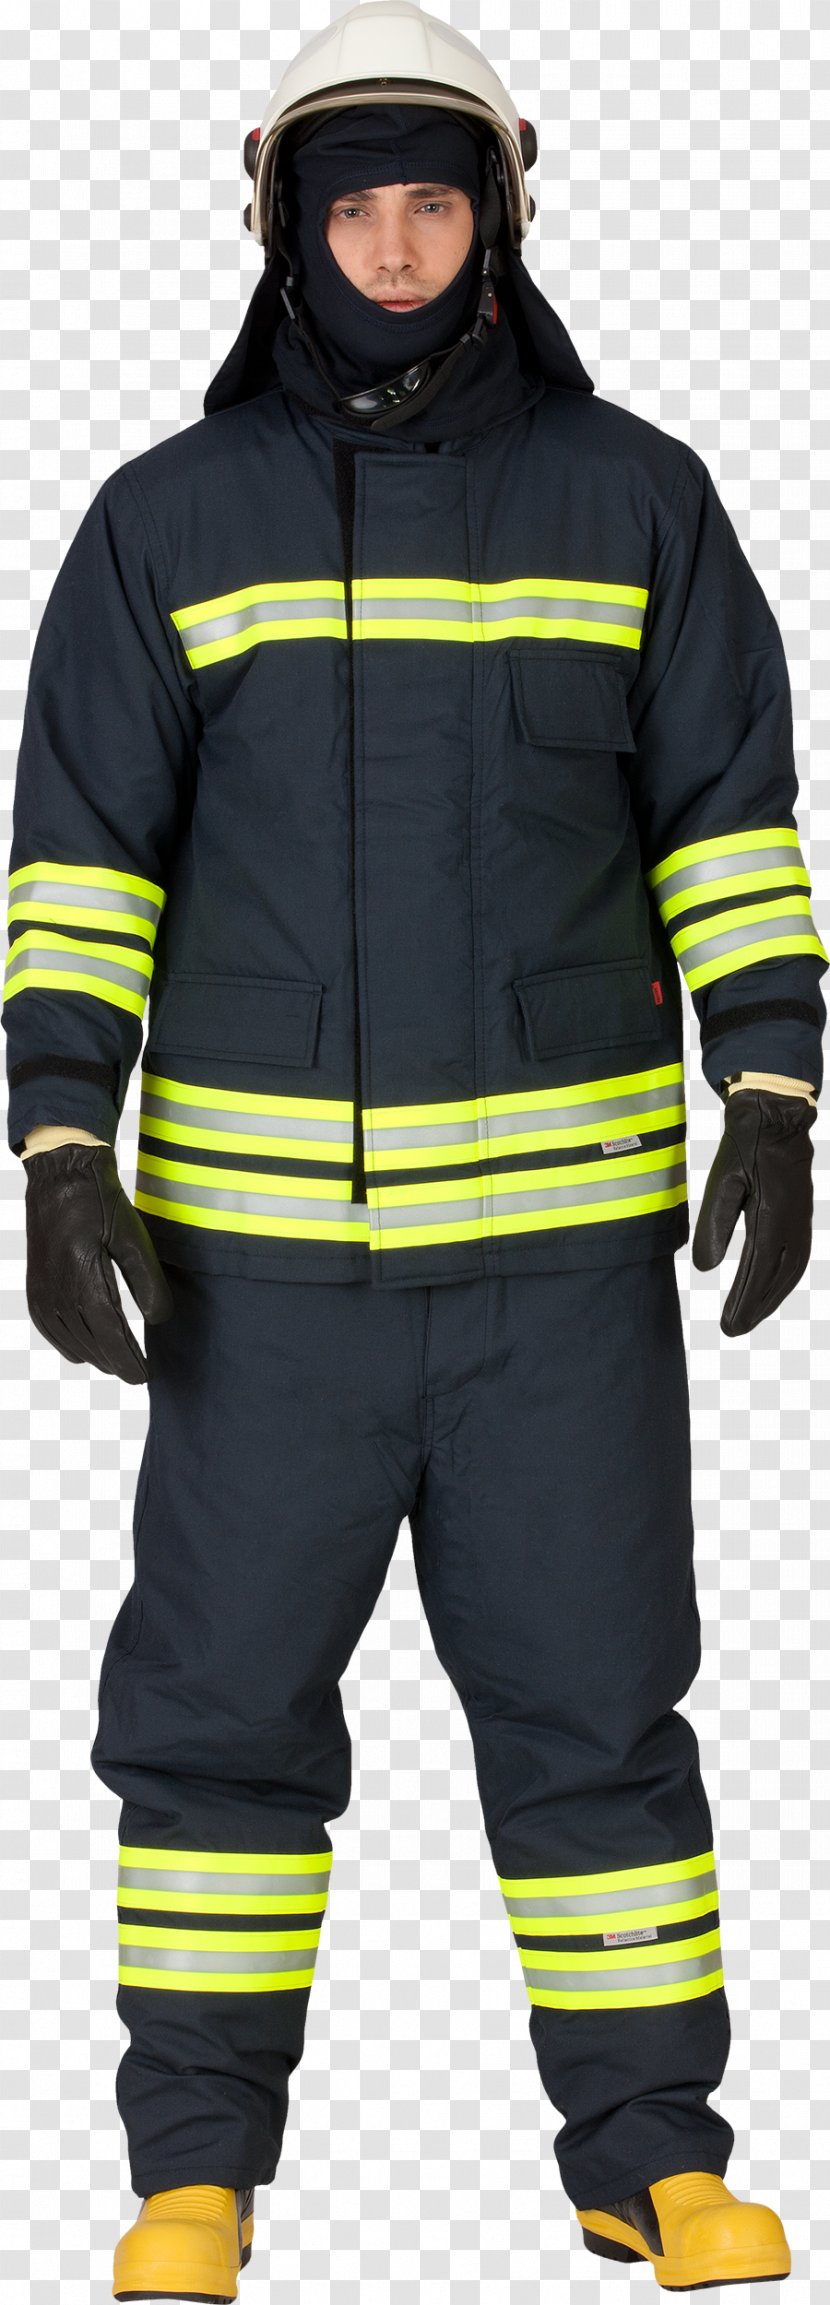 Firefighter Nomex Hoodie Personal Protective Equipment Jacket - Jersey Transparent PNG